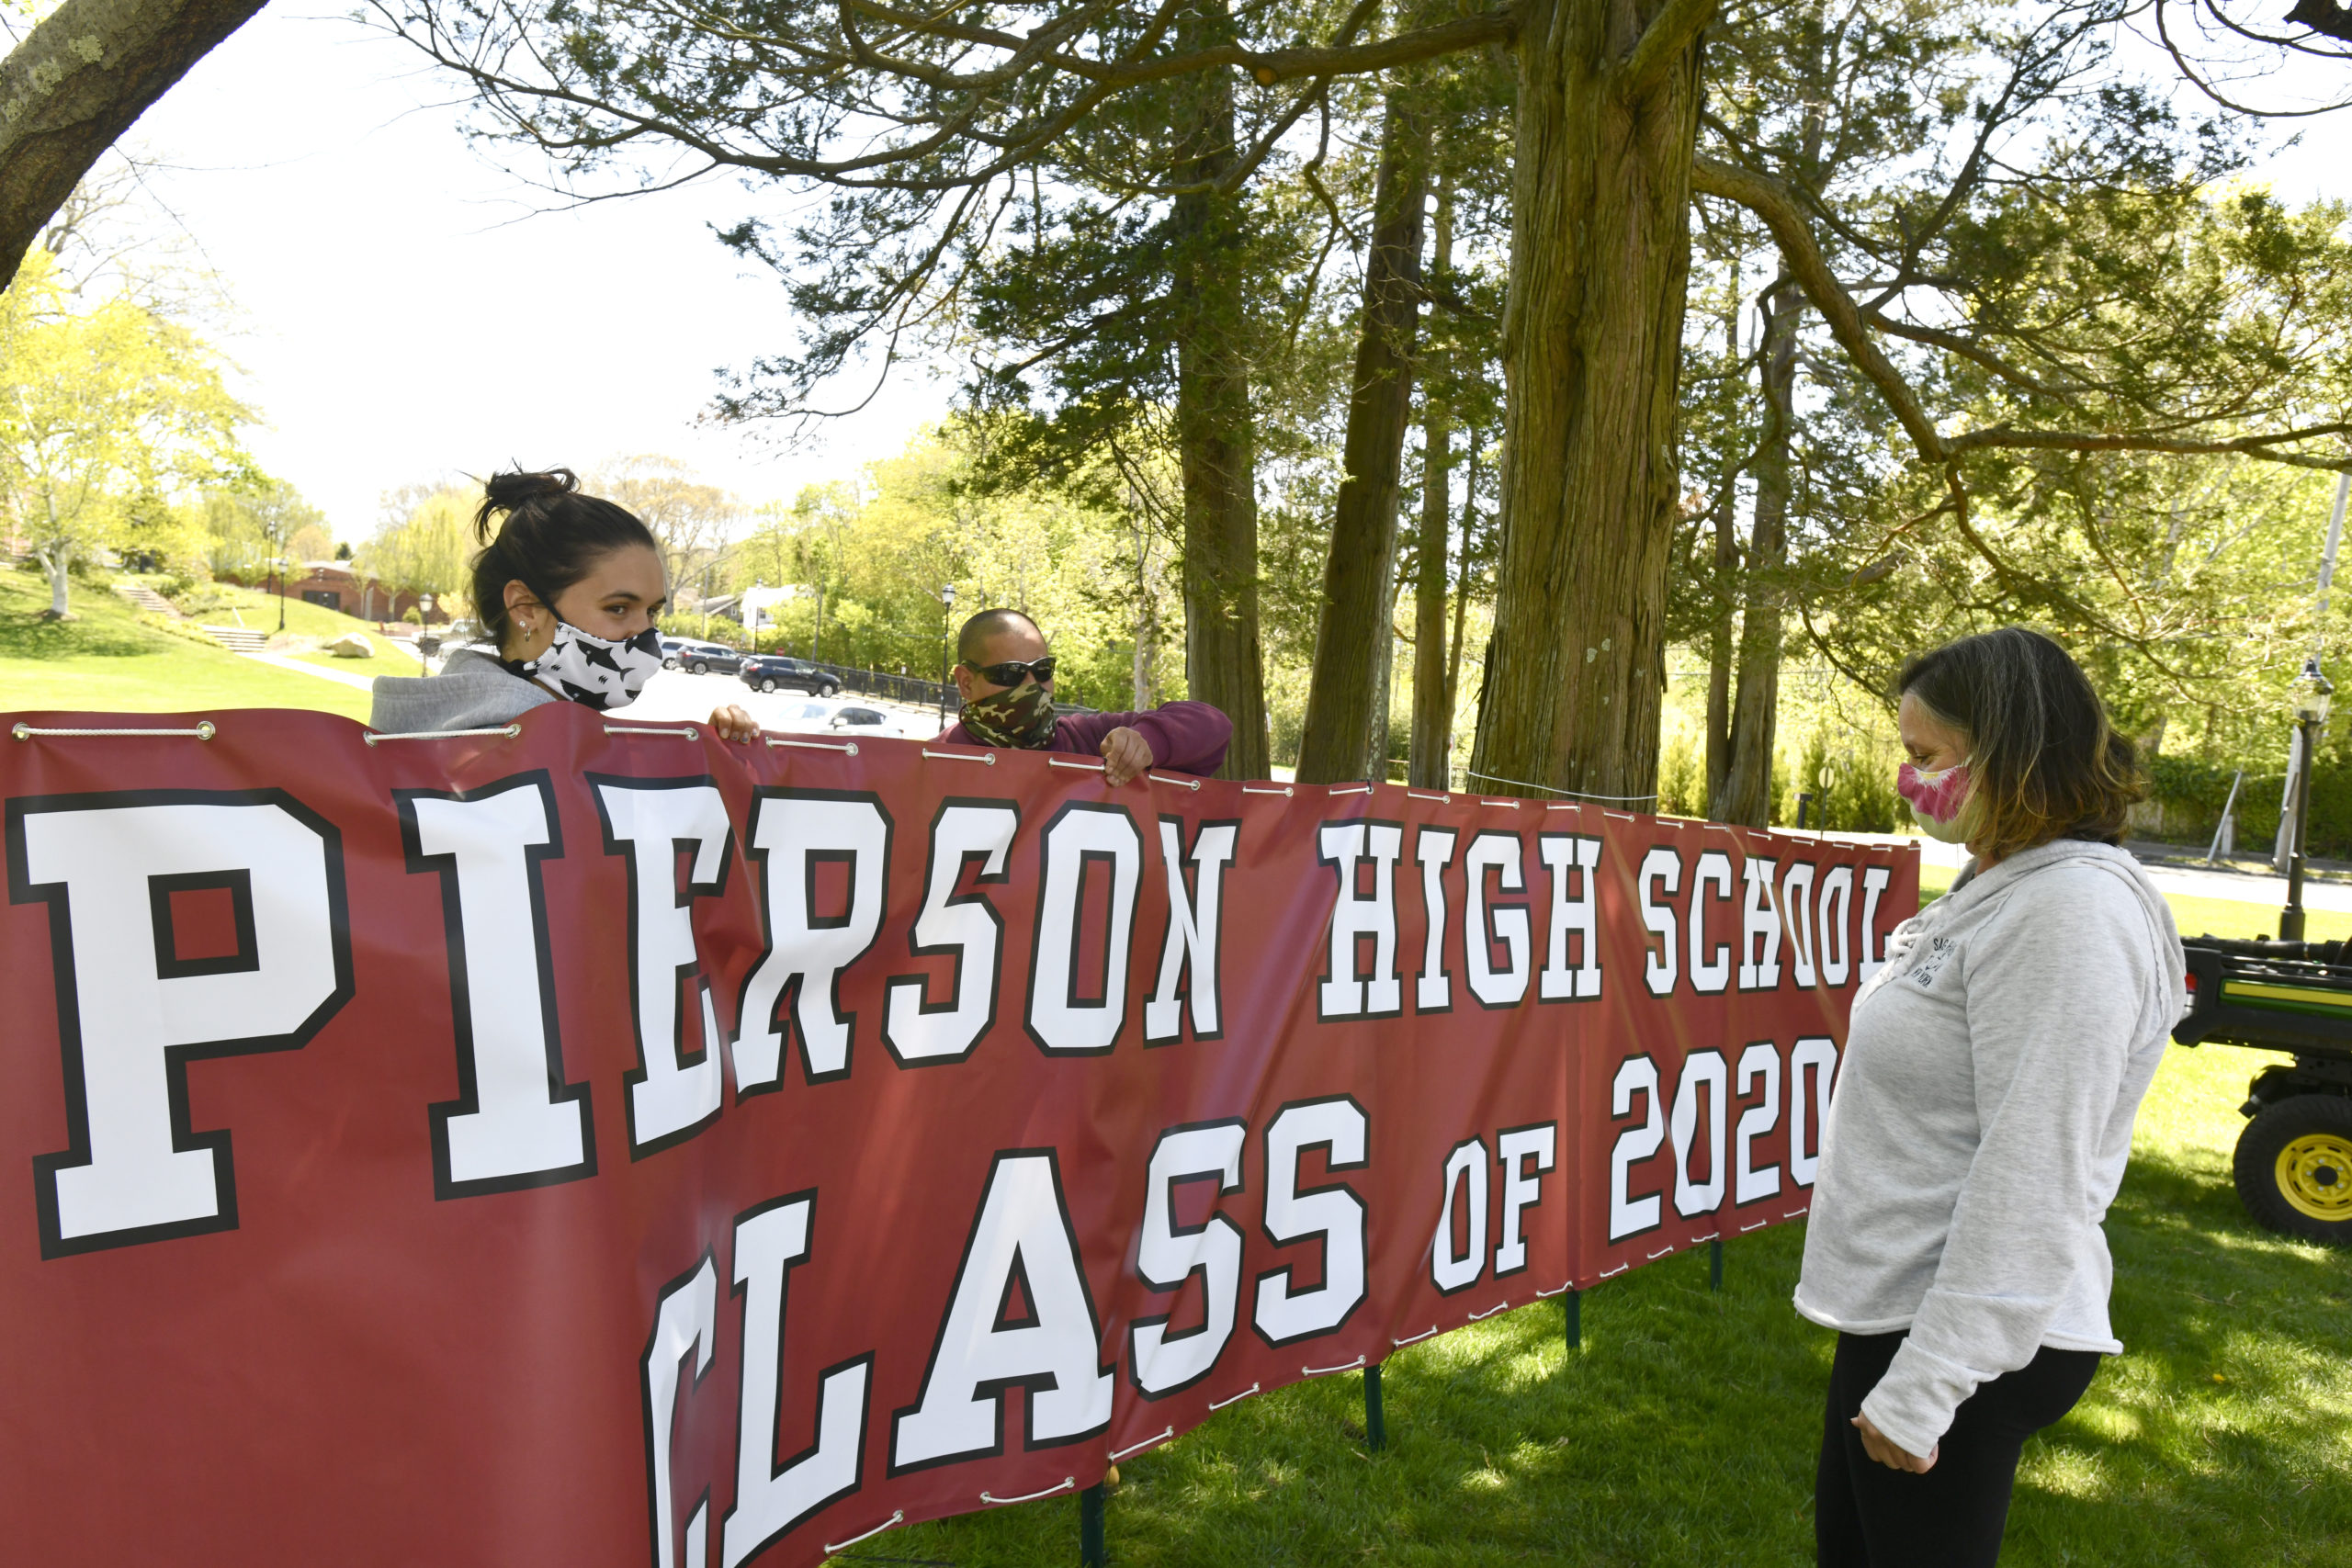 Emiley Nill, Jorge L. Maya and Fran Nill put up the sign at Pierson High School on Wednesday.